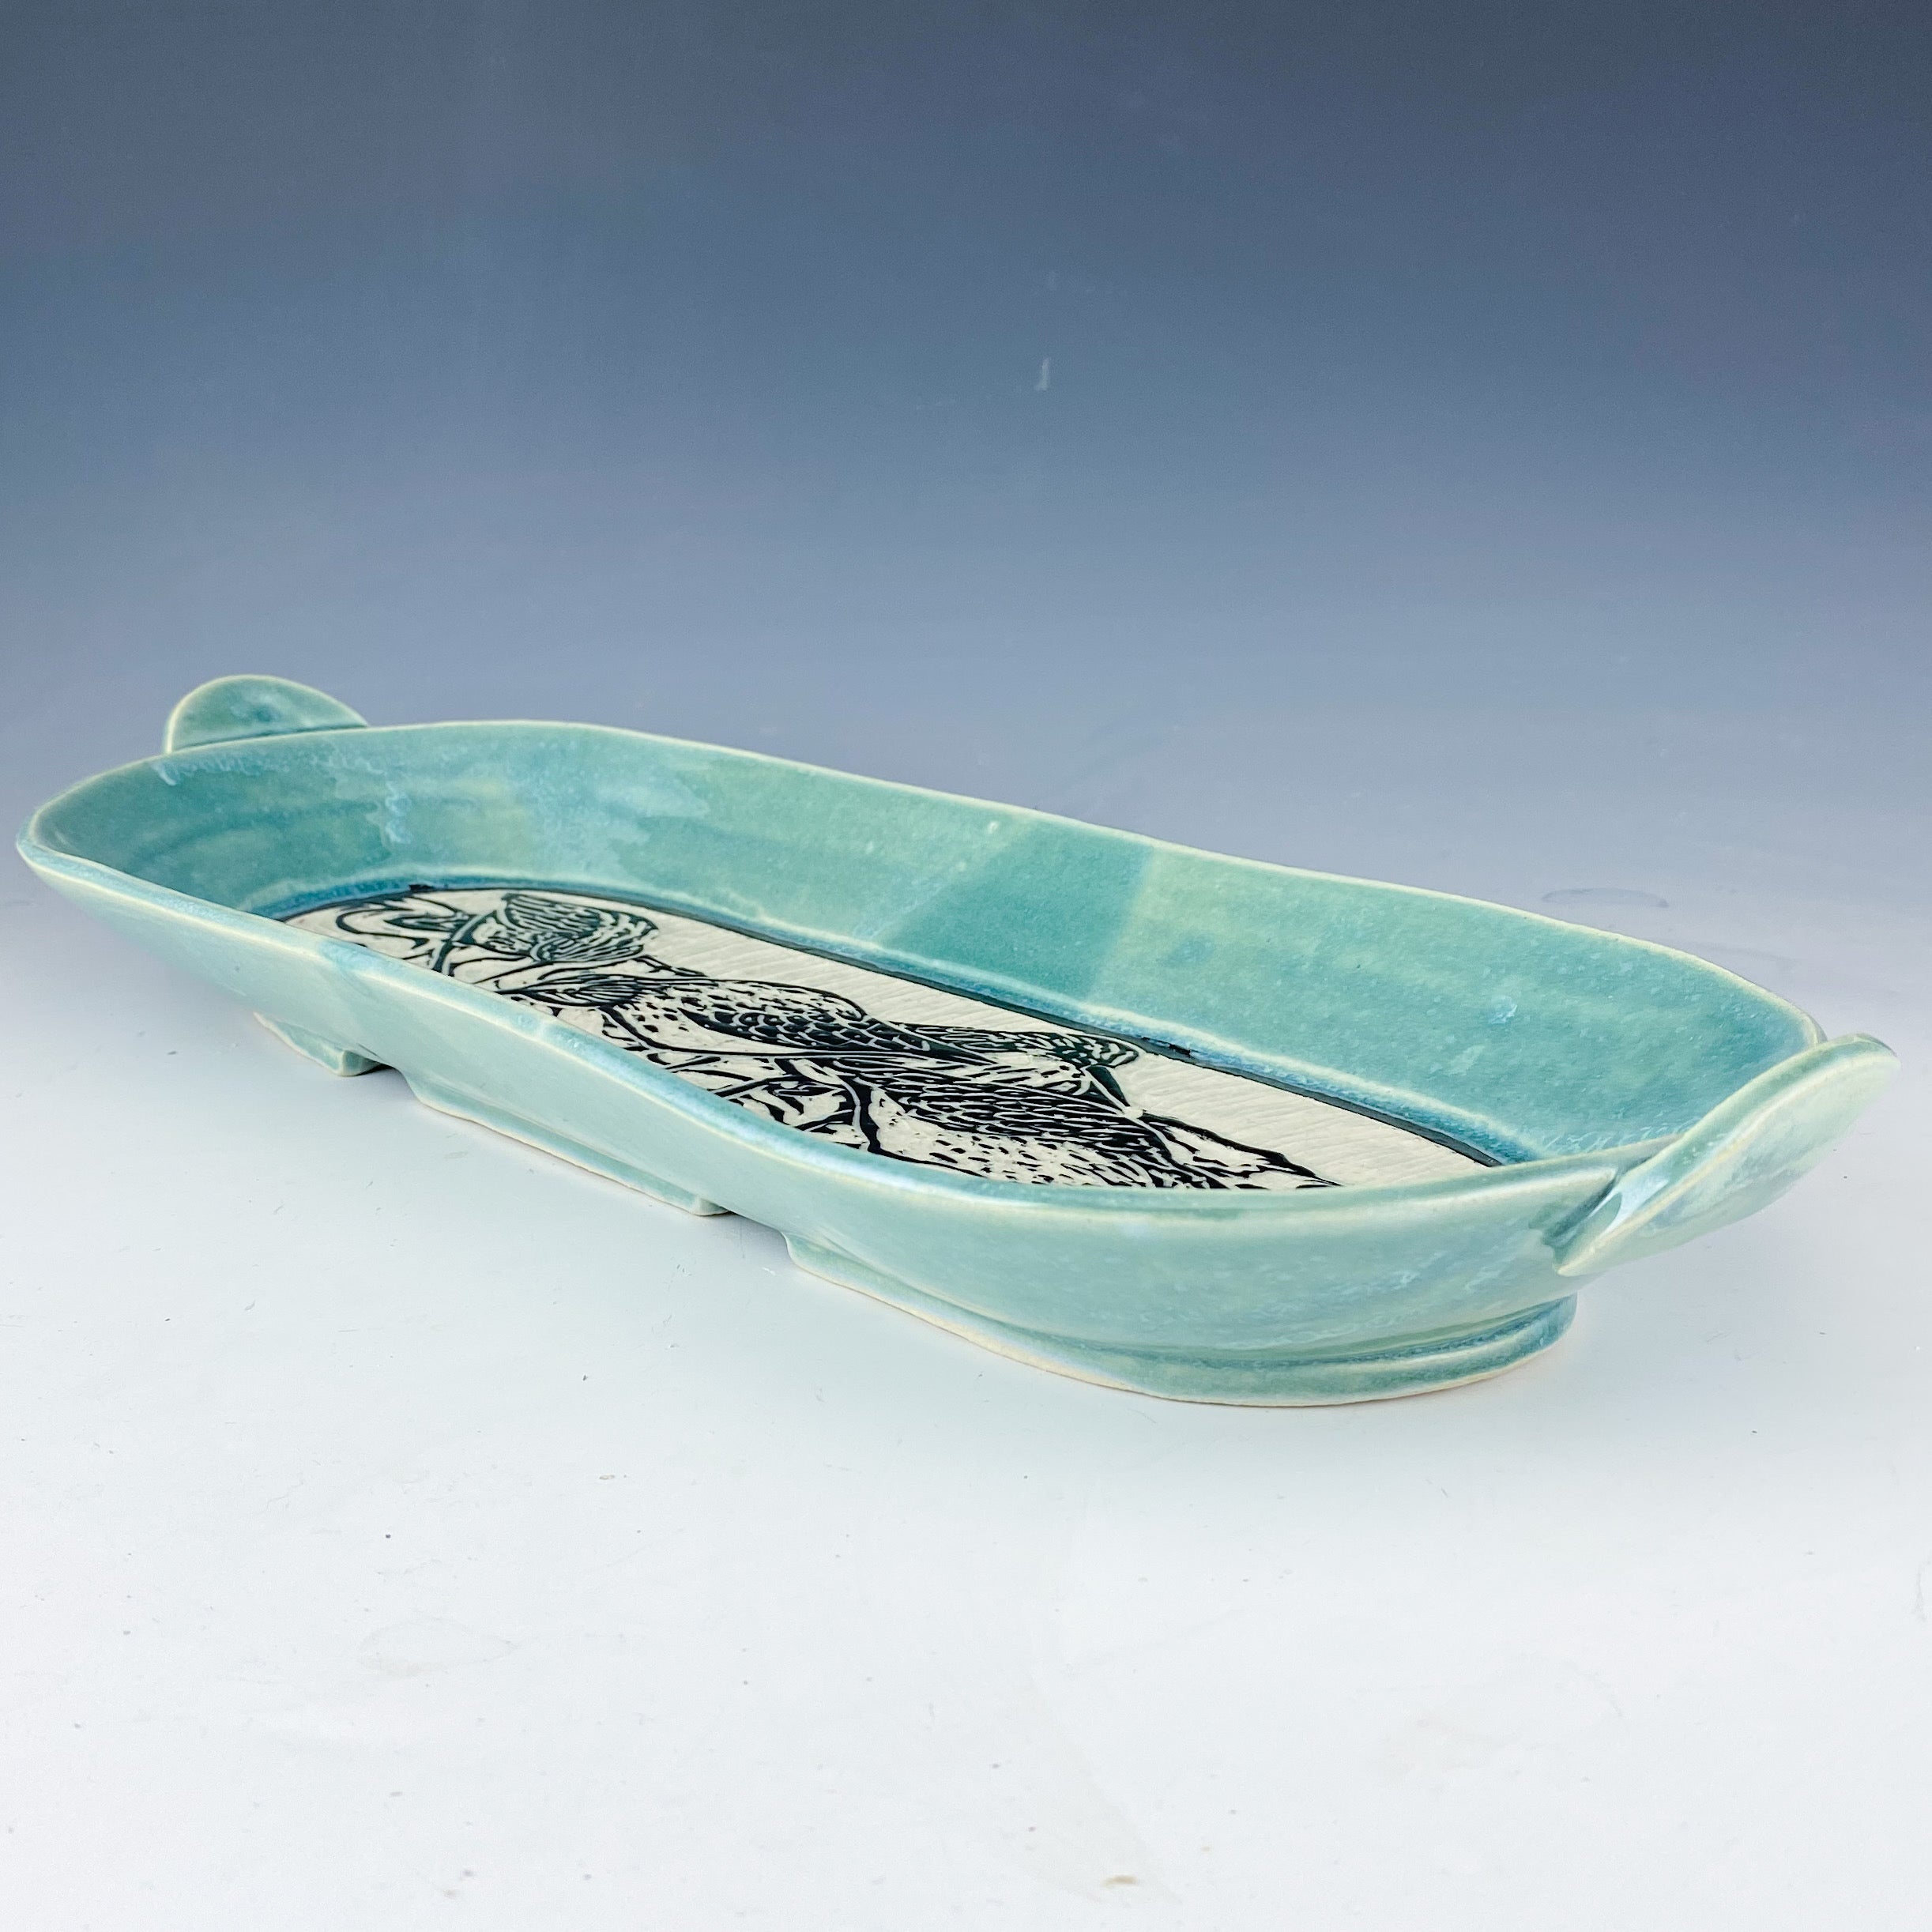 Sandpiper Deep Rounded Oval Tray in Blue